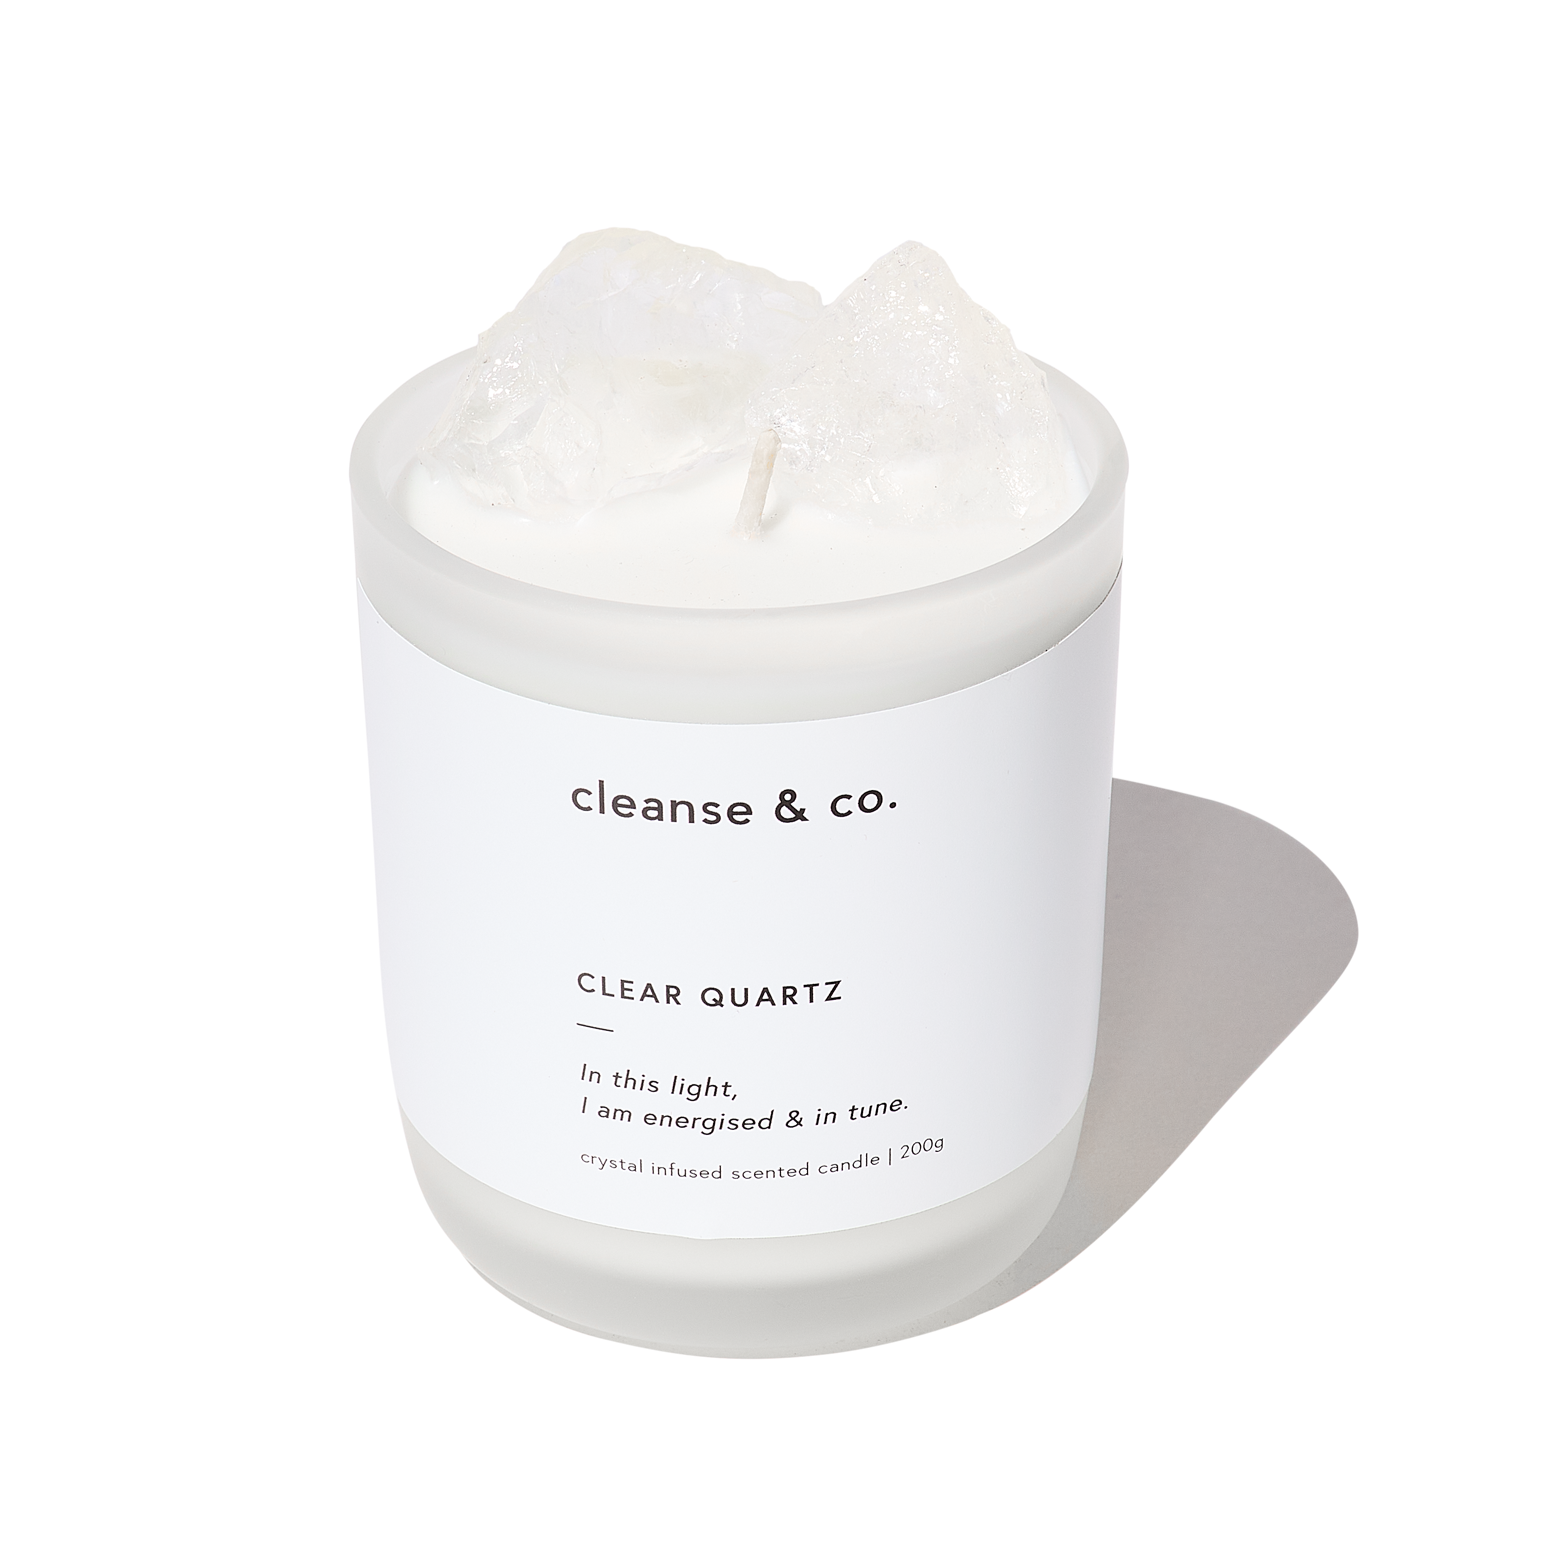 clear quartz crystal candle. 200g by Cleanse & co